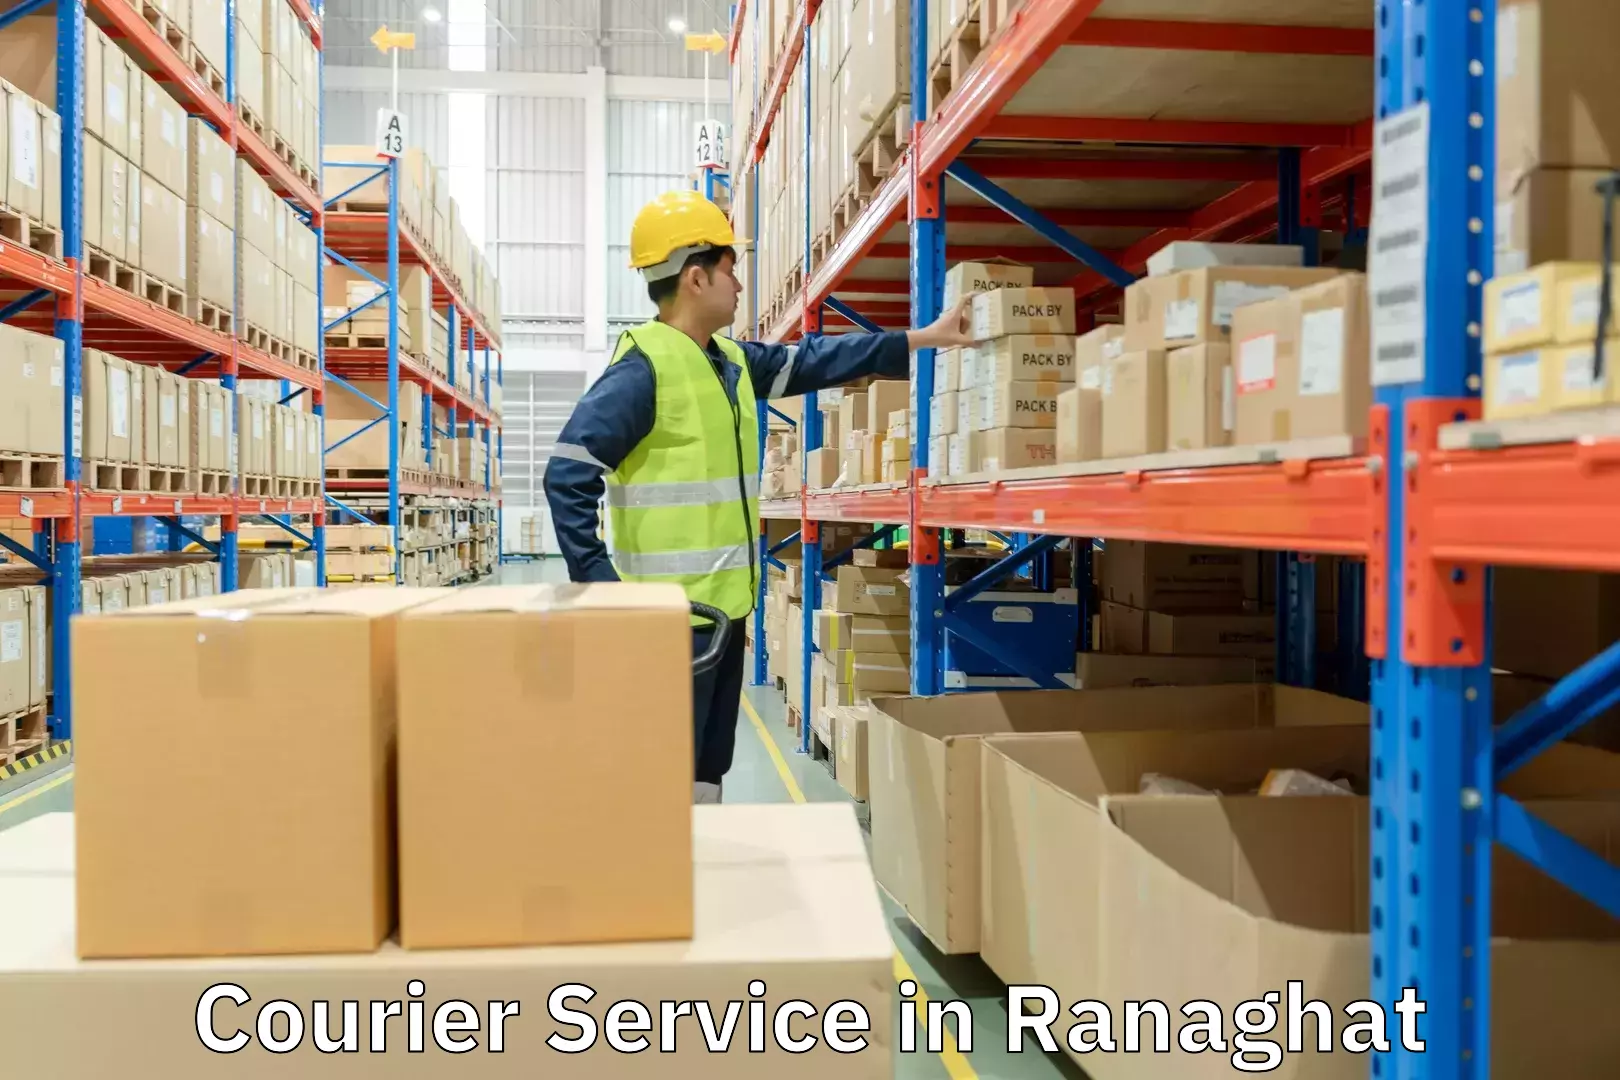 Advanced shipping network in Ranaghat